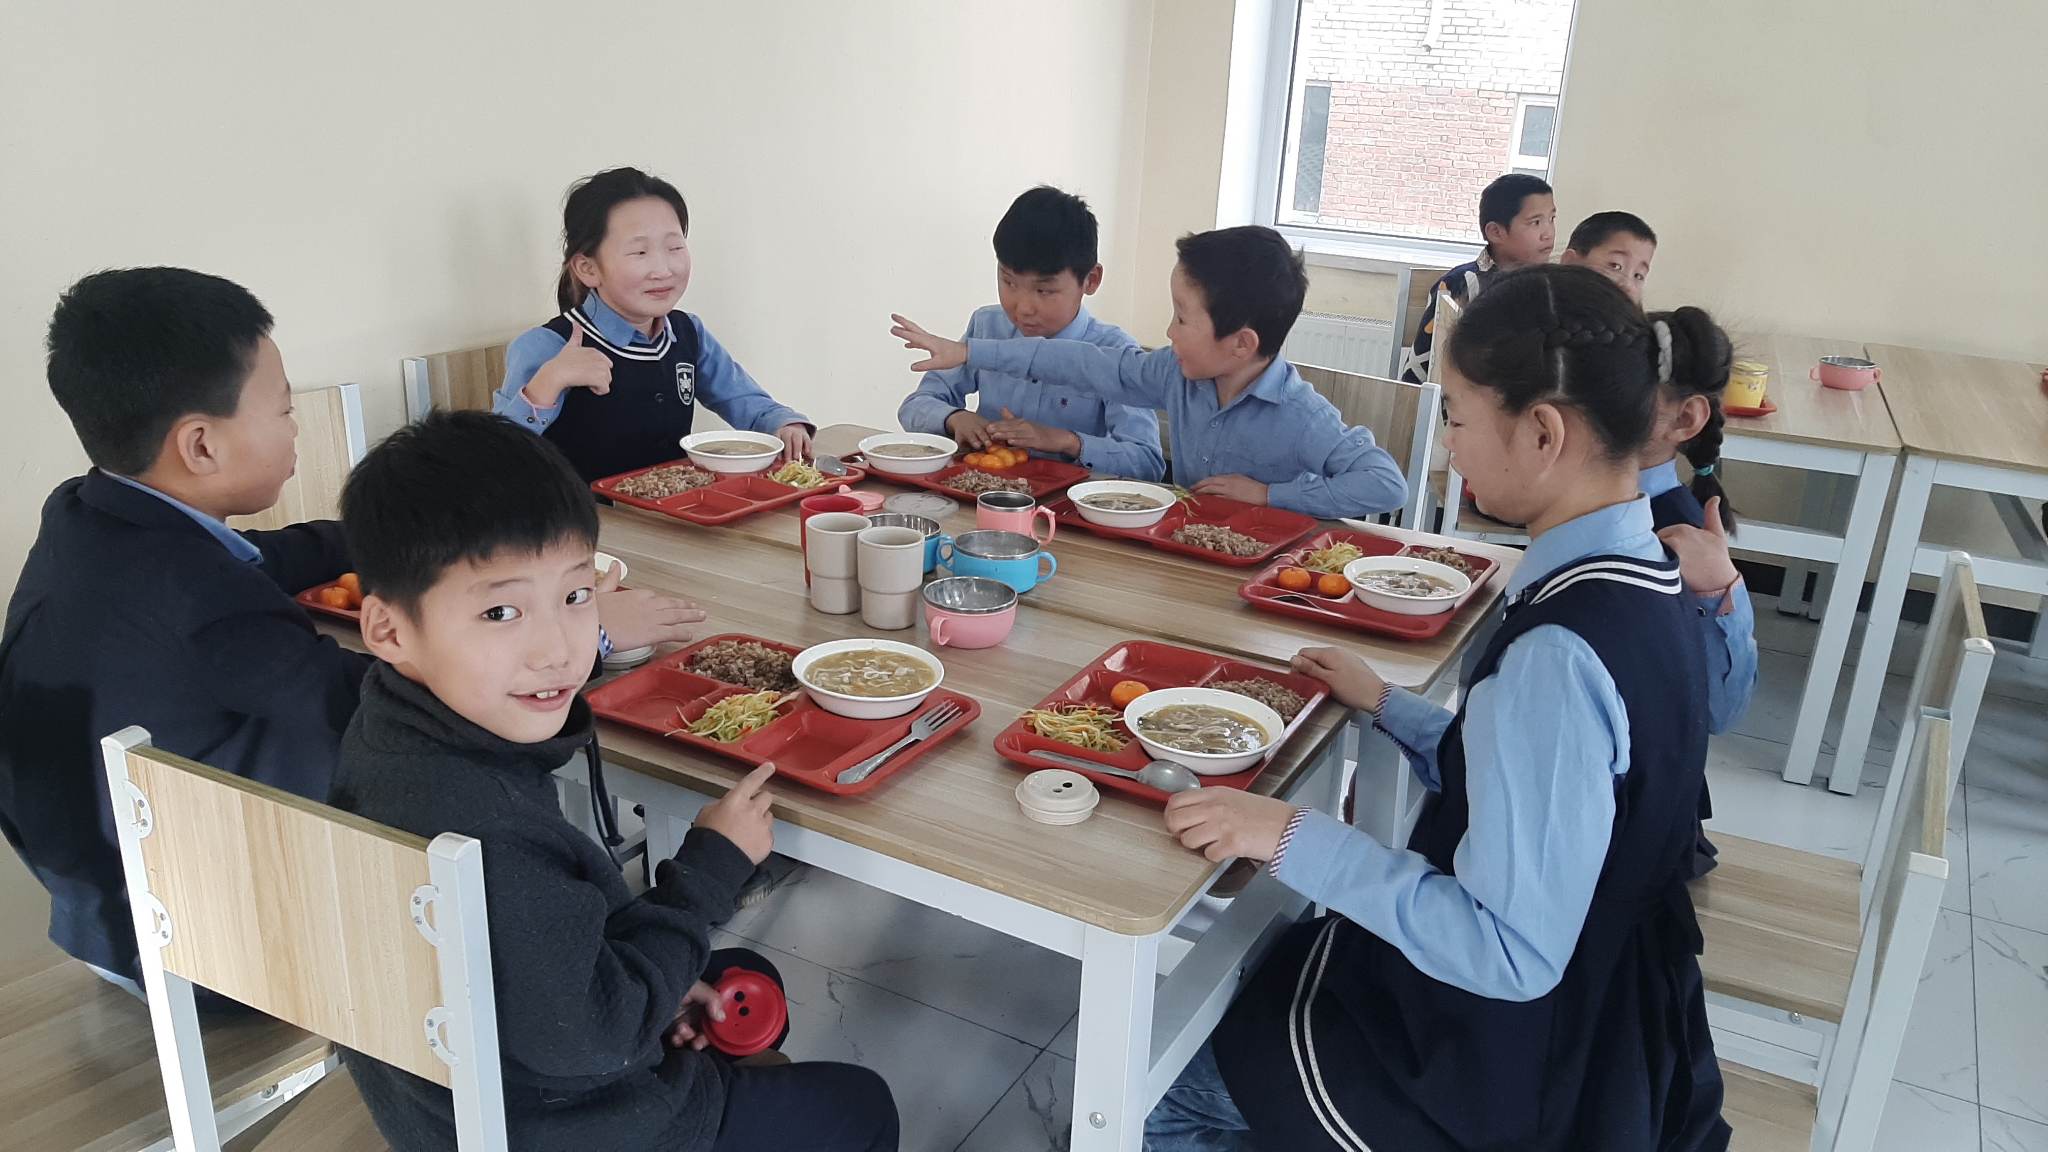 Group of children seated around table enjoy school lunch!